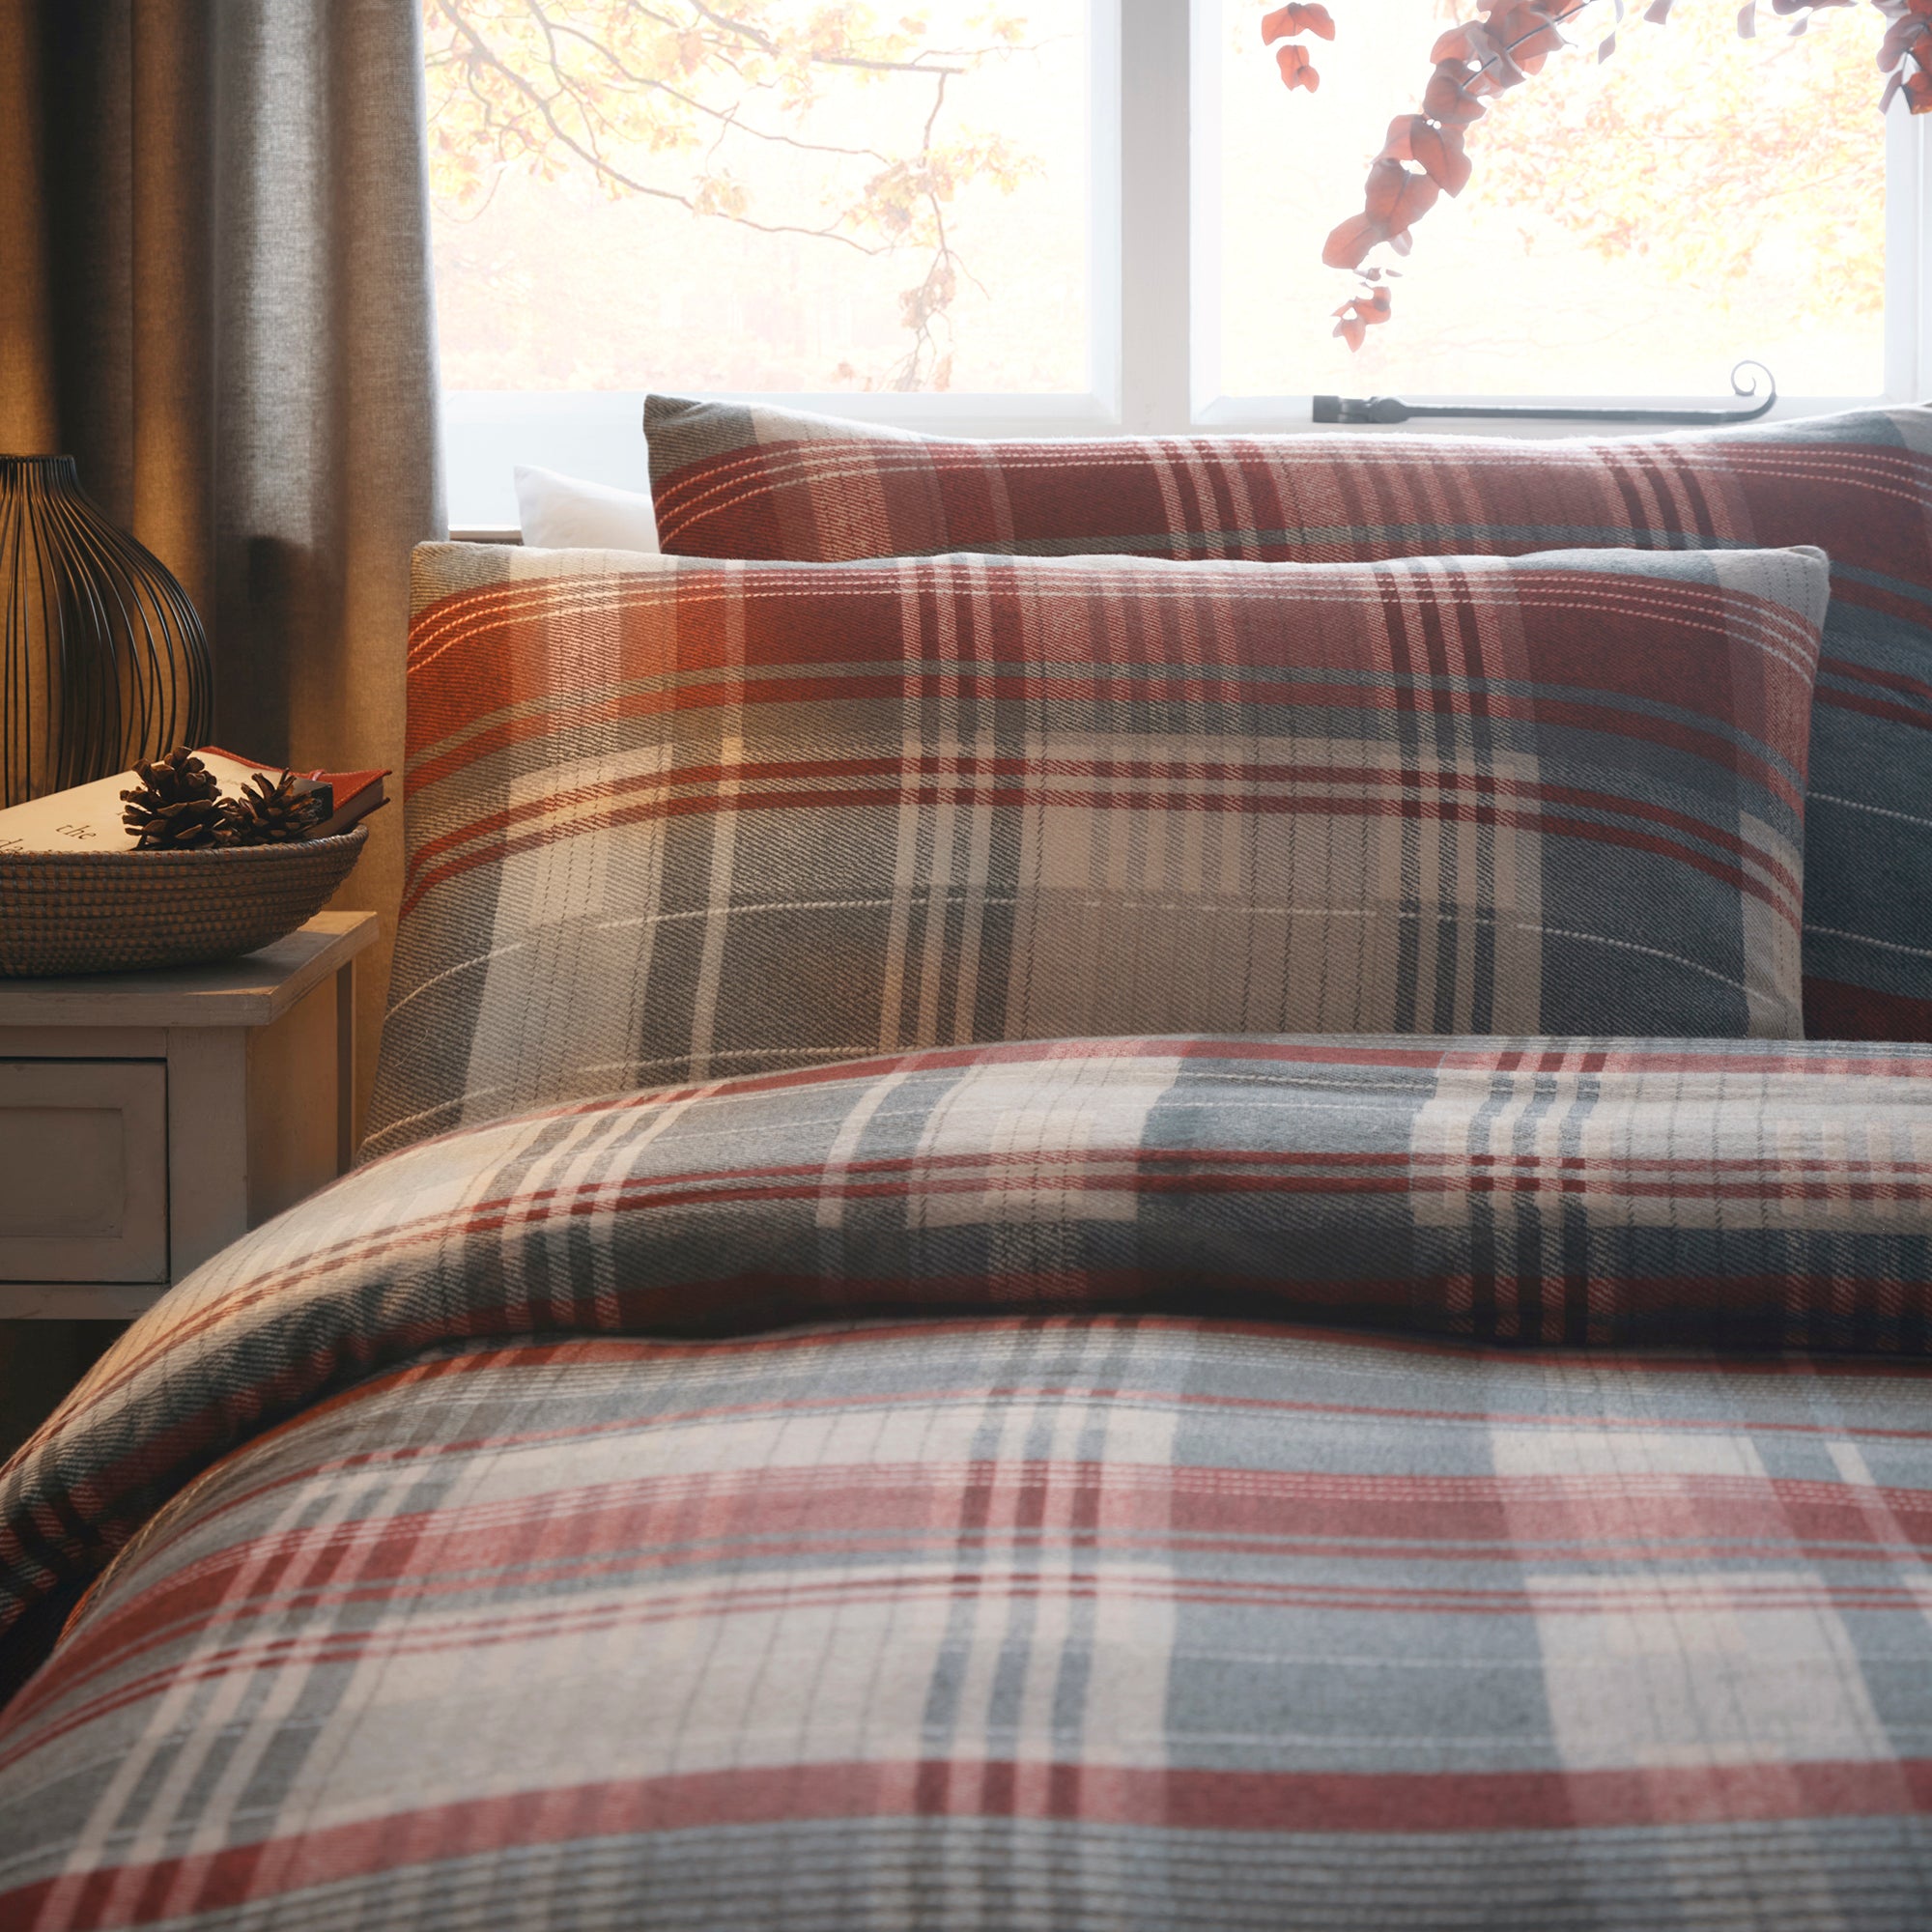 Connolly - 100% Brushed Cotton Checked Duvet Set in Red - by Appletree Hygge